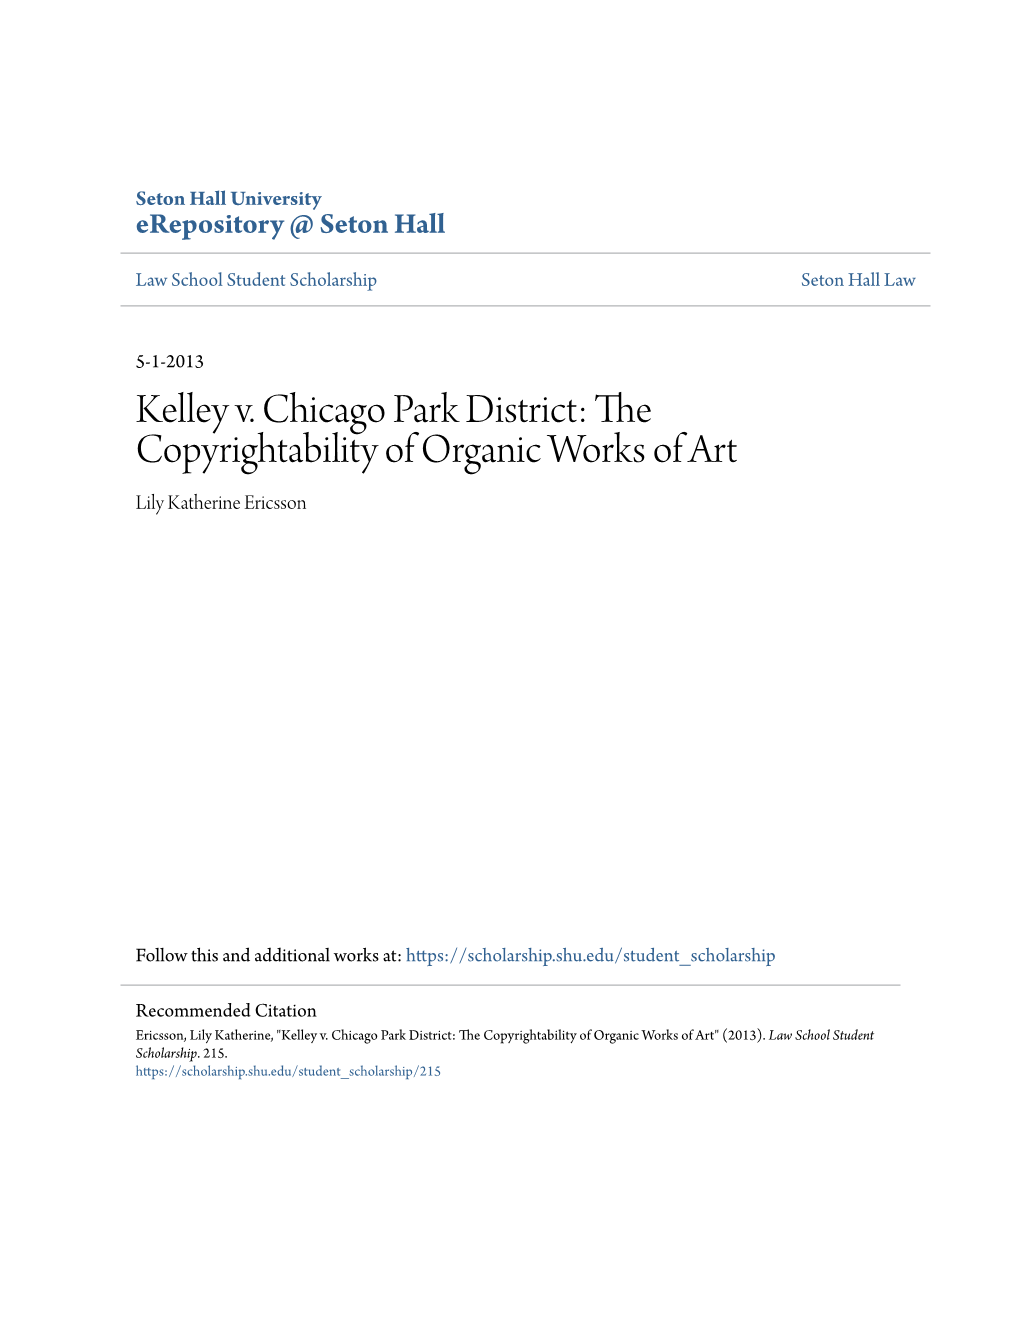 Kelley V. Chicago Park District: the Copyrightability of Organic Works of Art Lily Katherine Ericsson